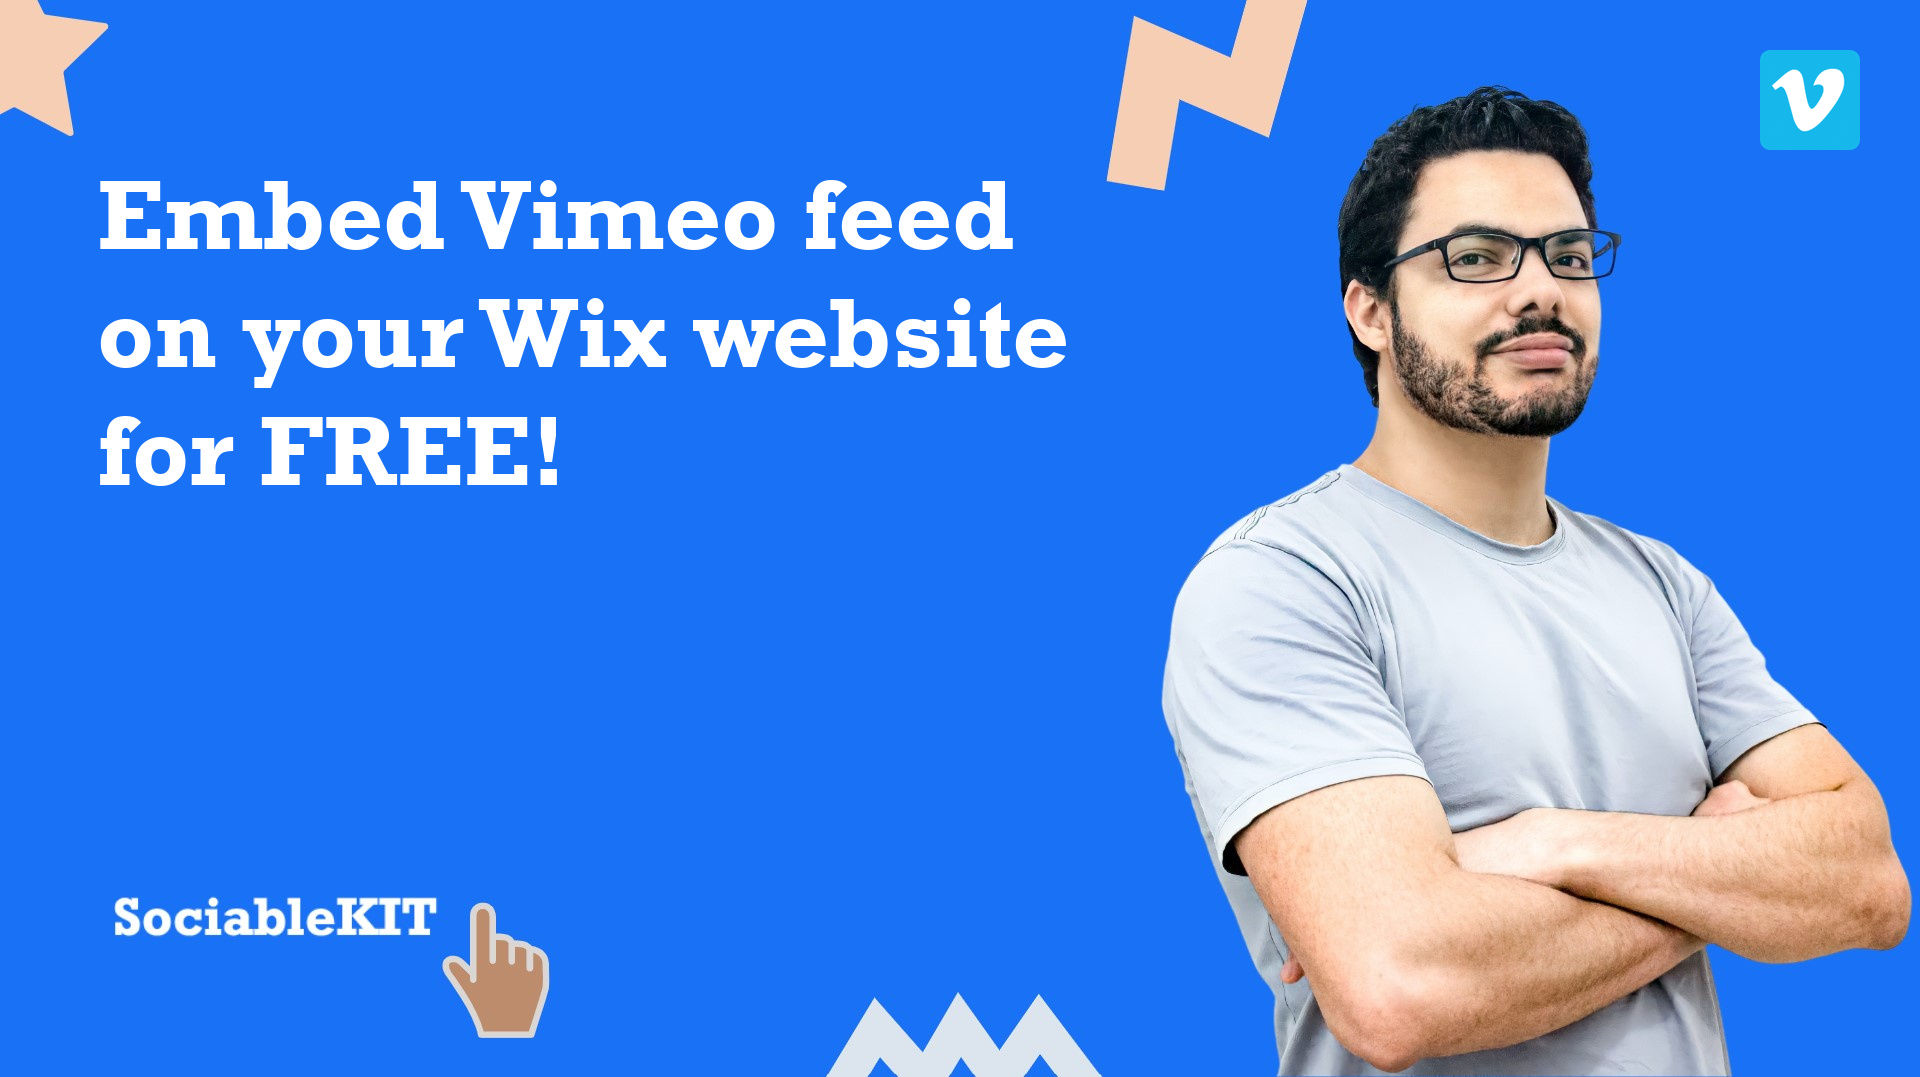 How to embed Vimeo feed on your Wix website for FREE?